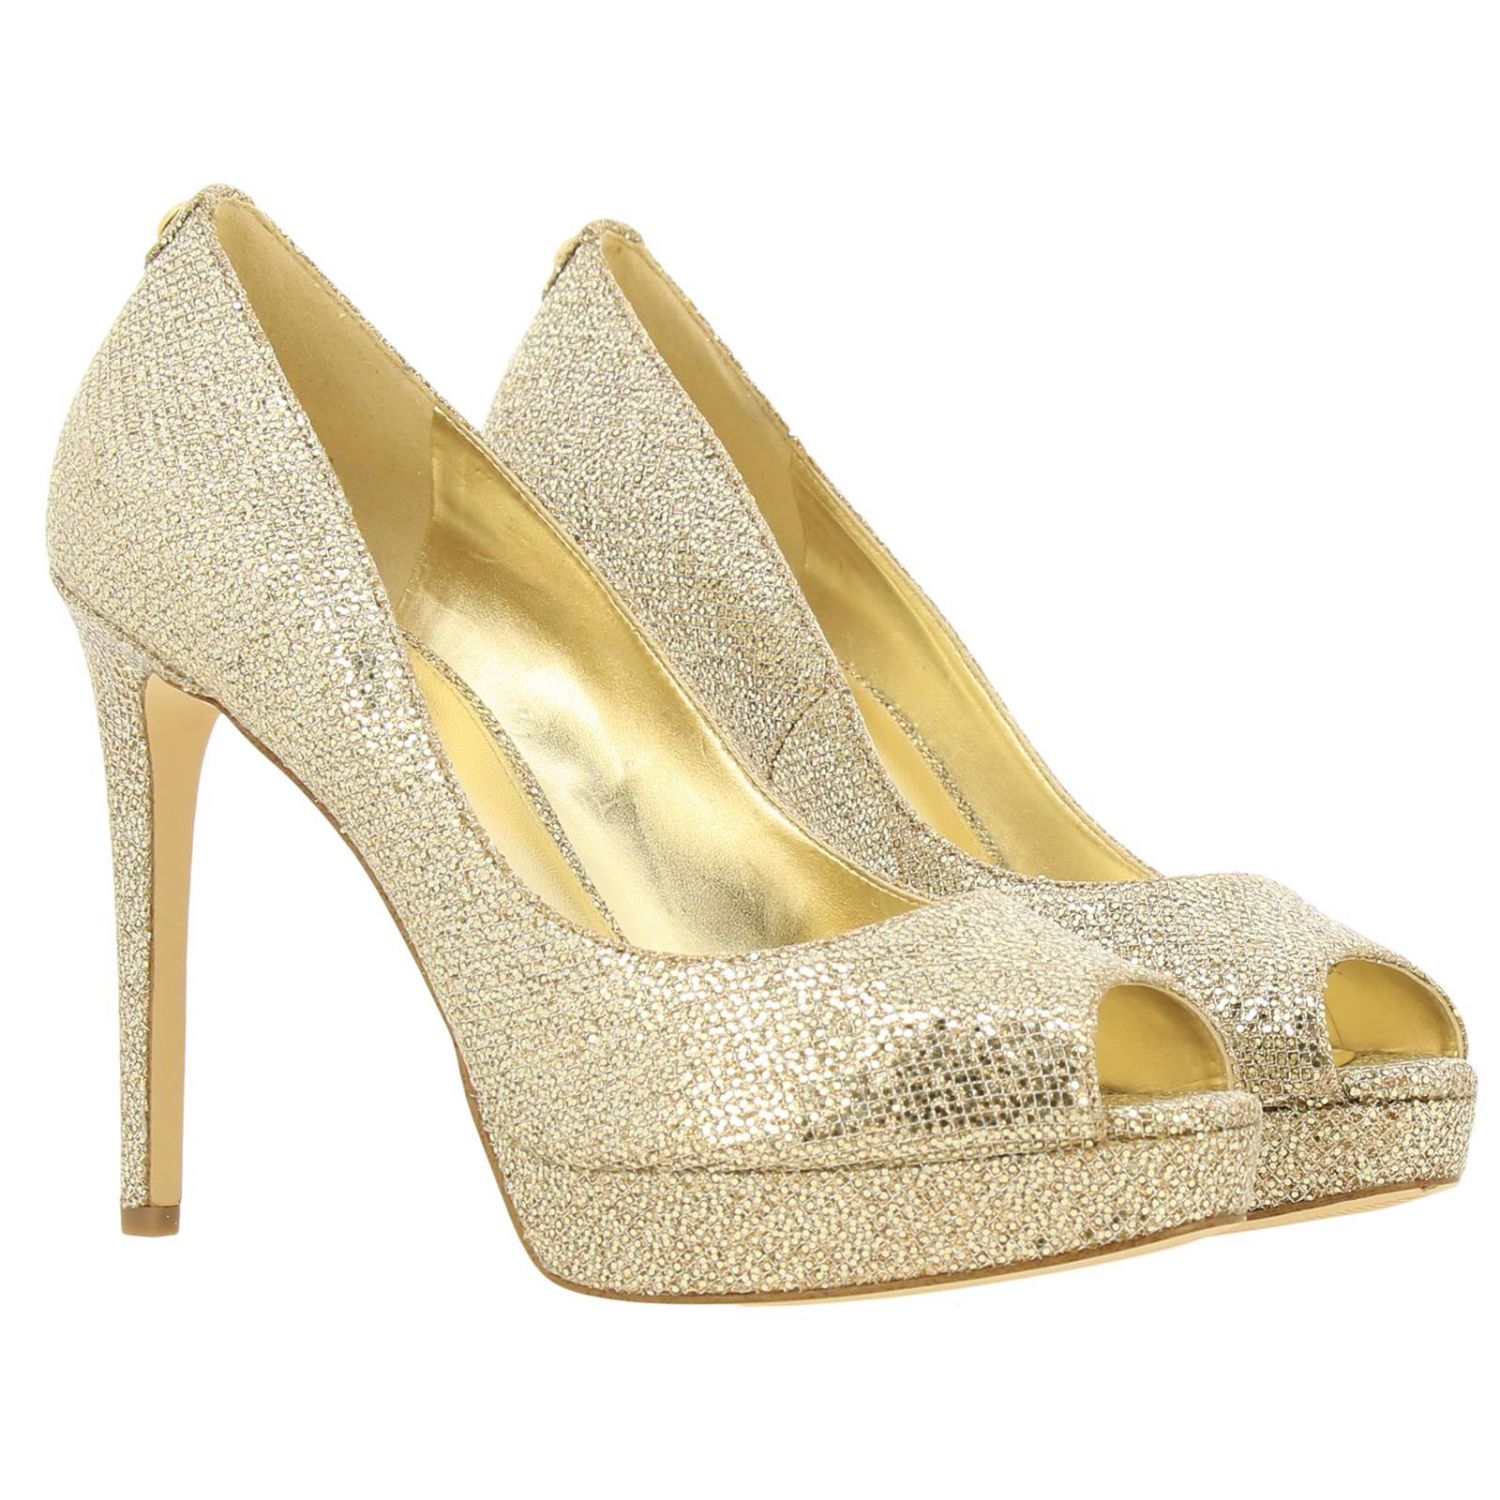 Michael Kors Outlet: Erika platform pumps in glitter fabric with open ...